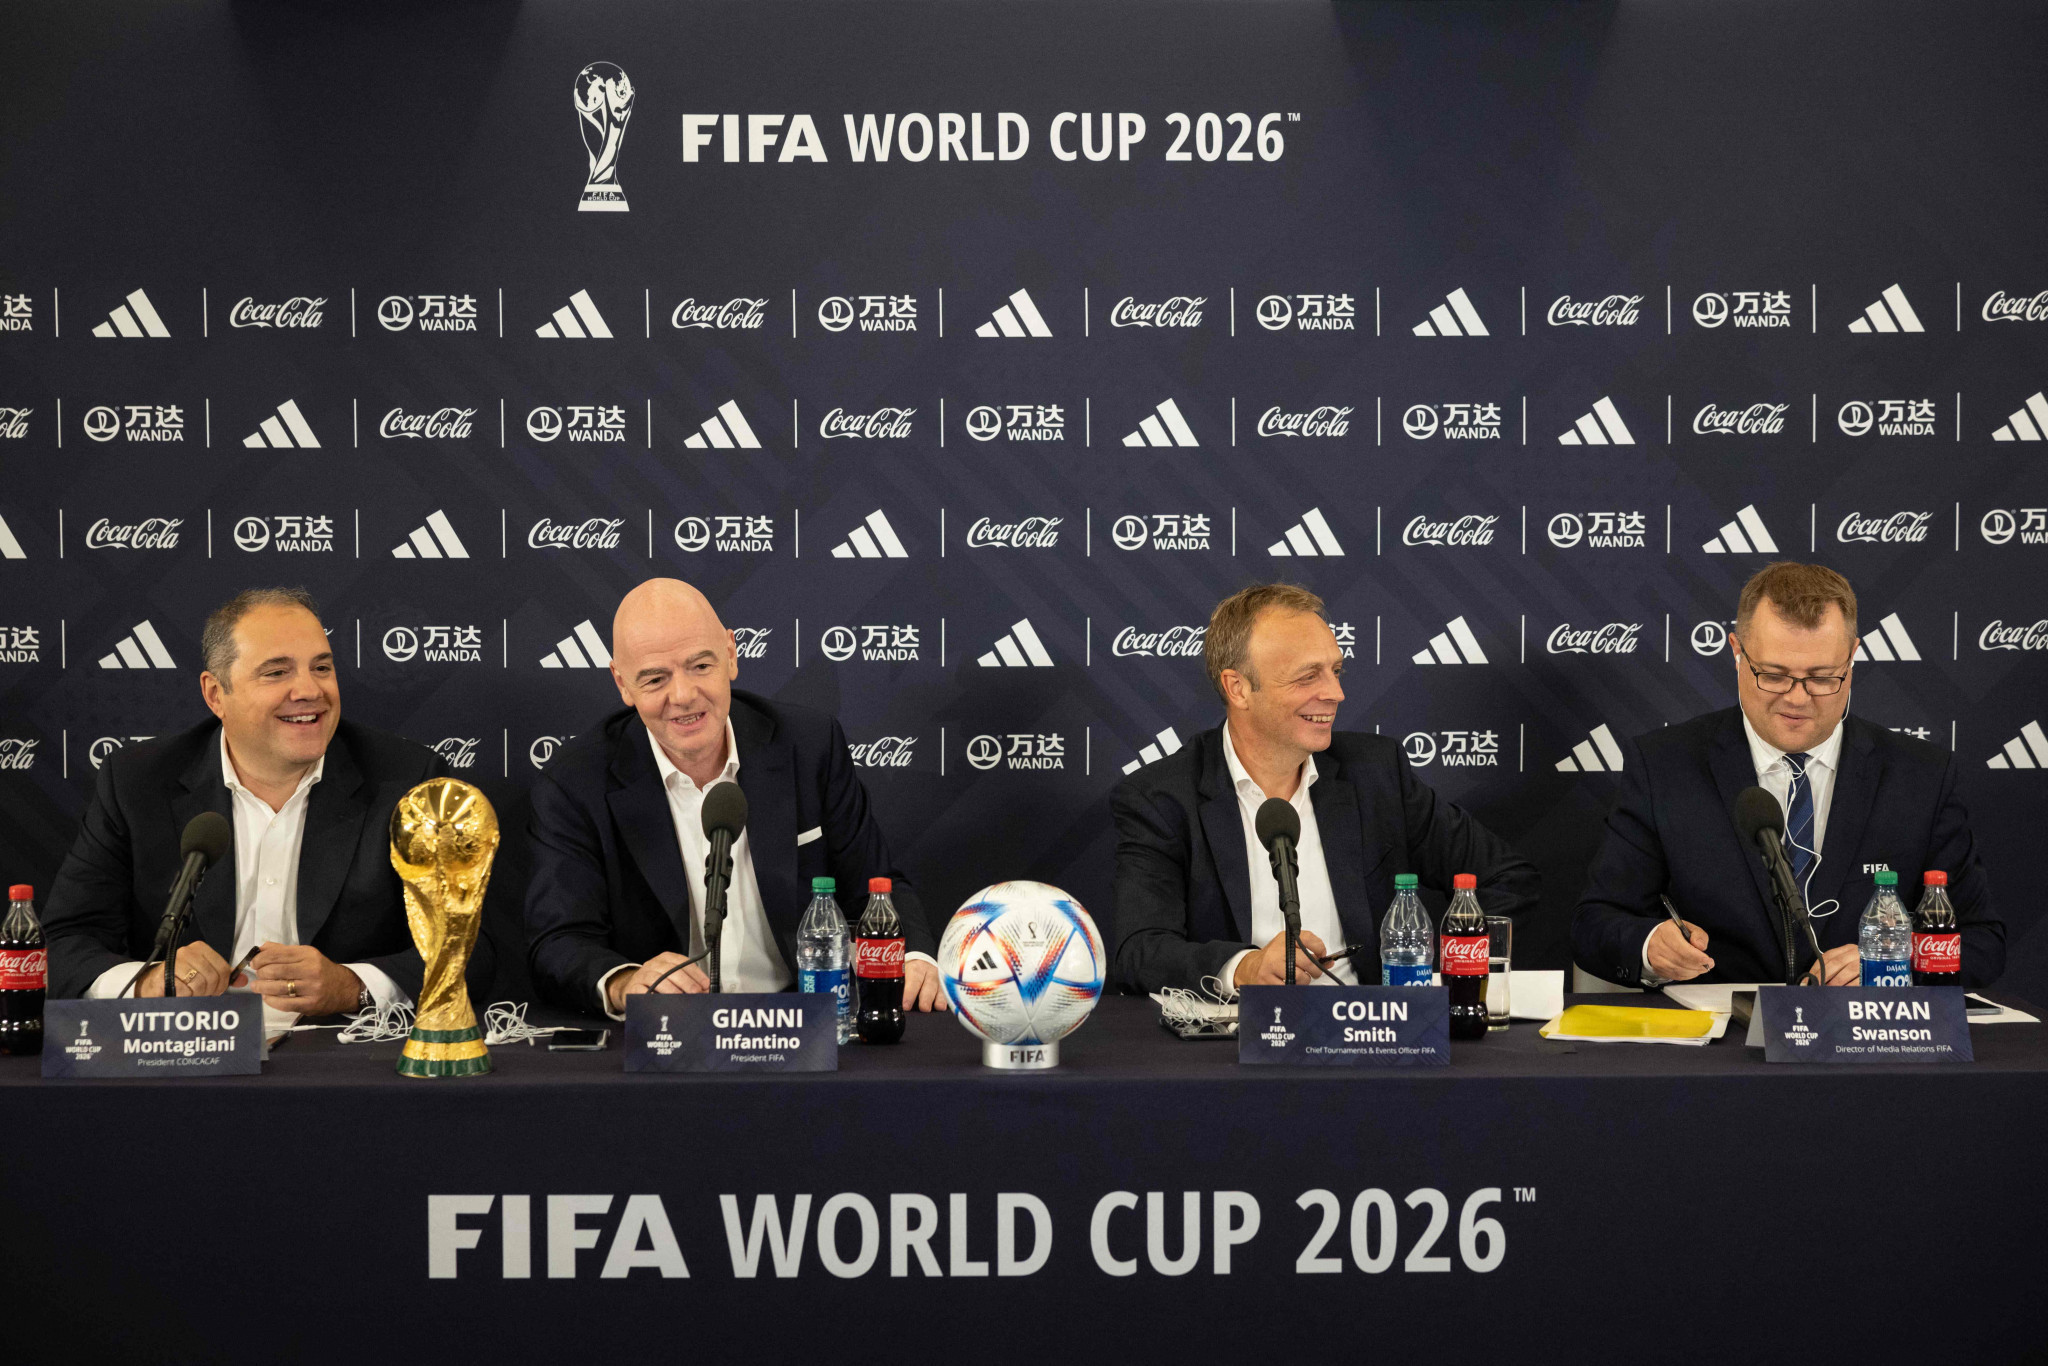 FIFA announces host cities for 2026 World Cup